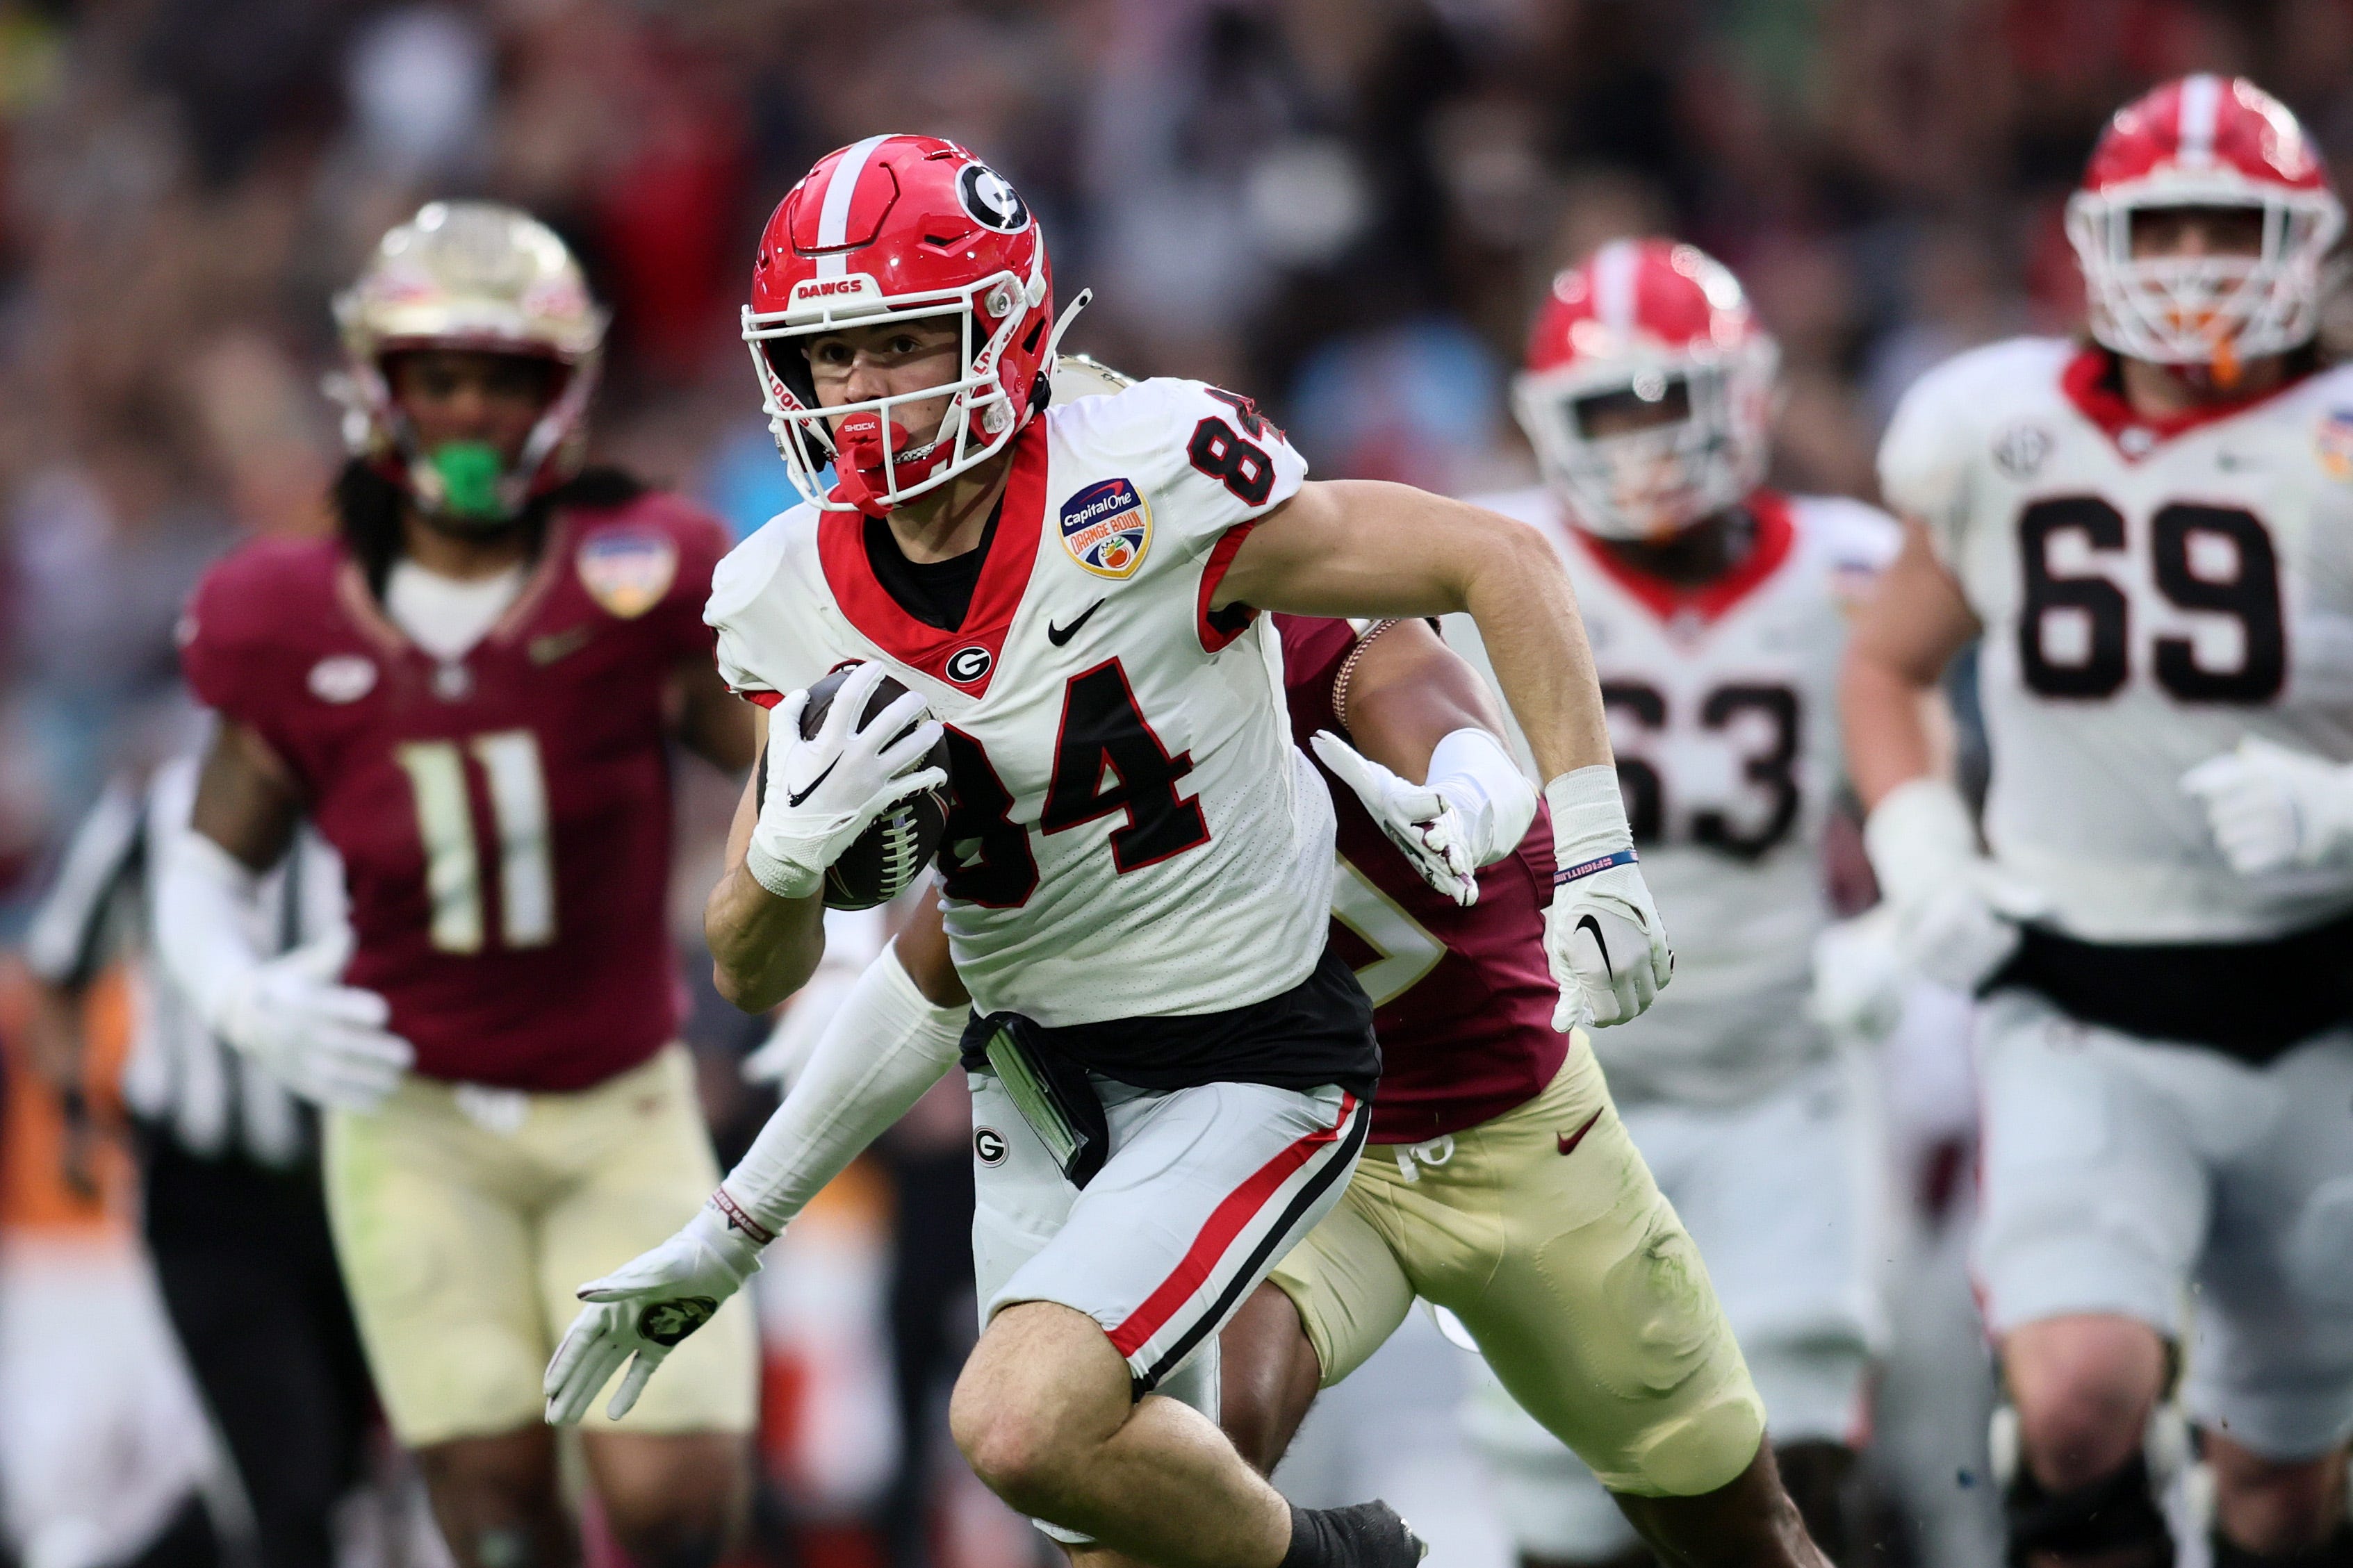 panthers strike another trade with giants in mel kiper's new 2-round mock draft